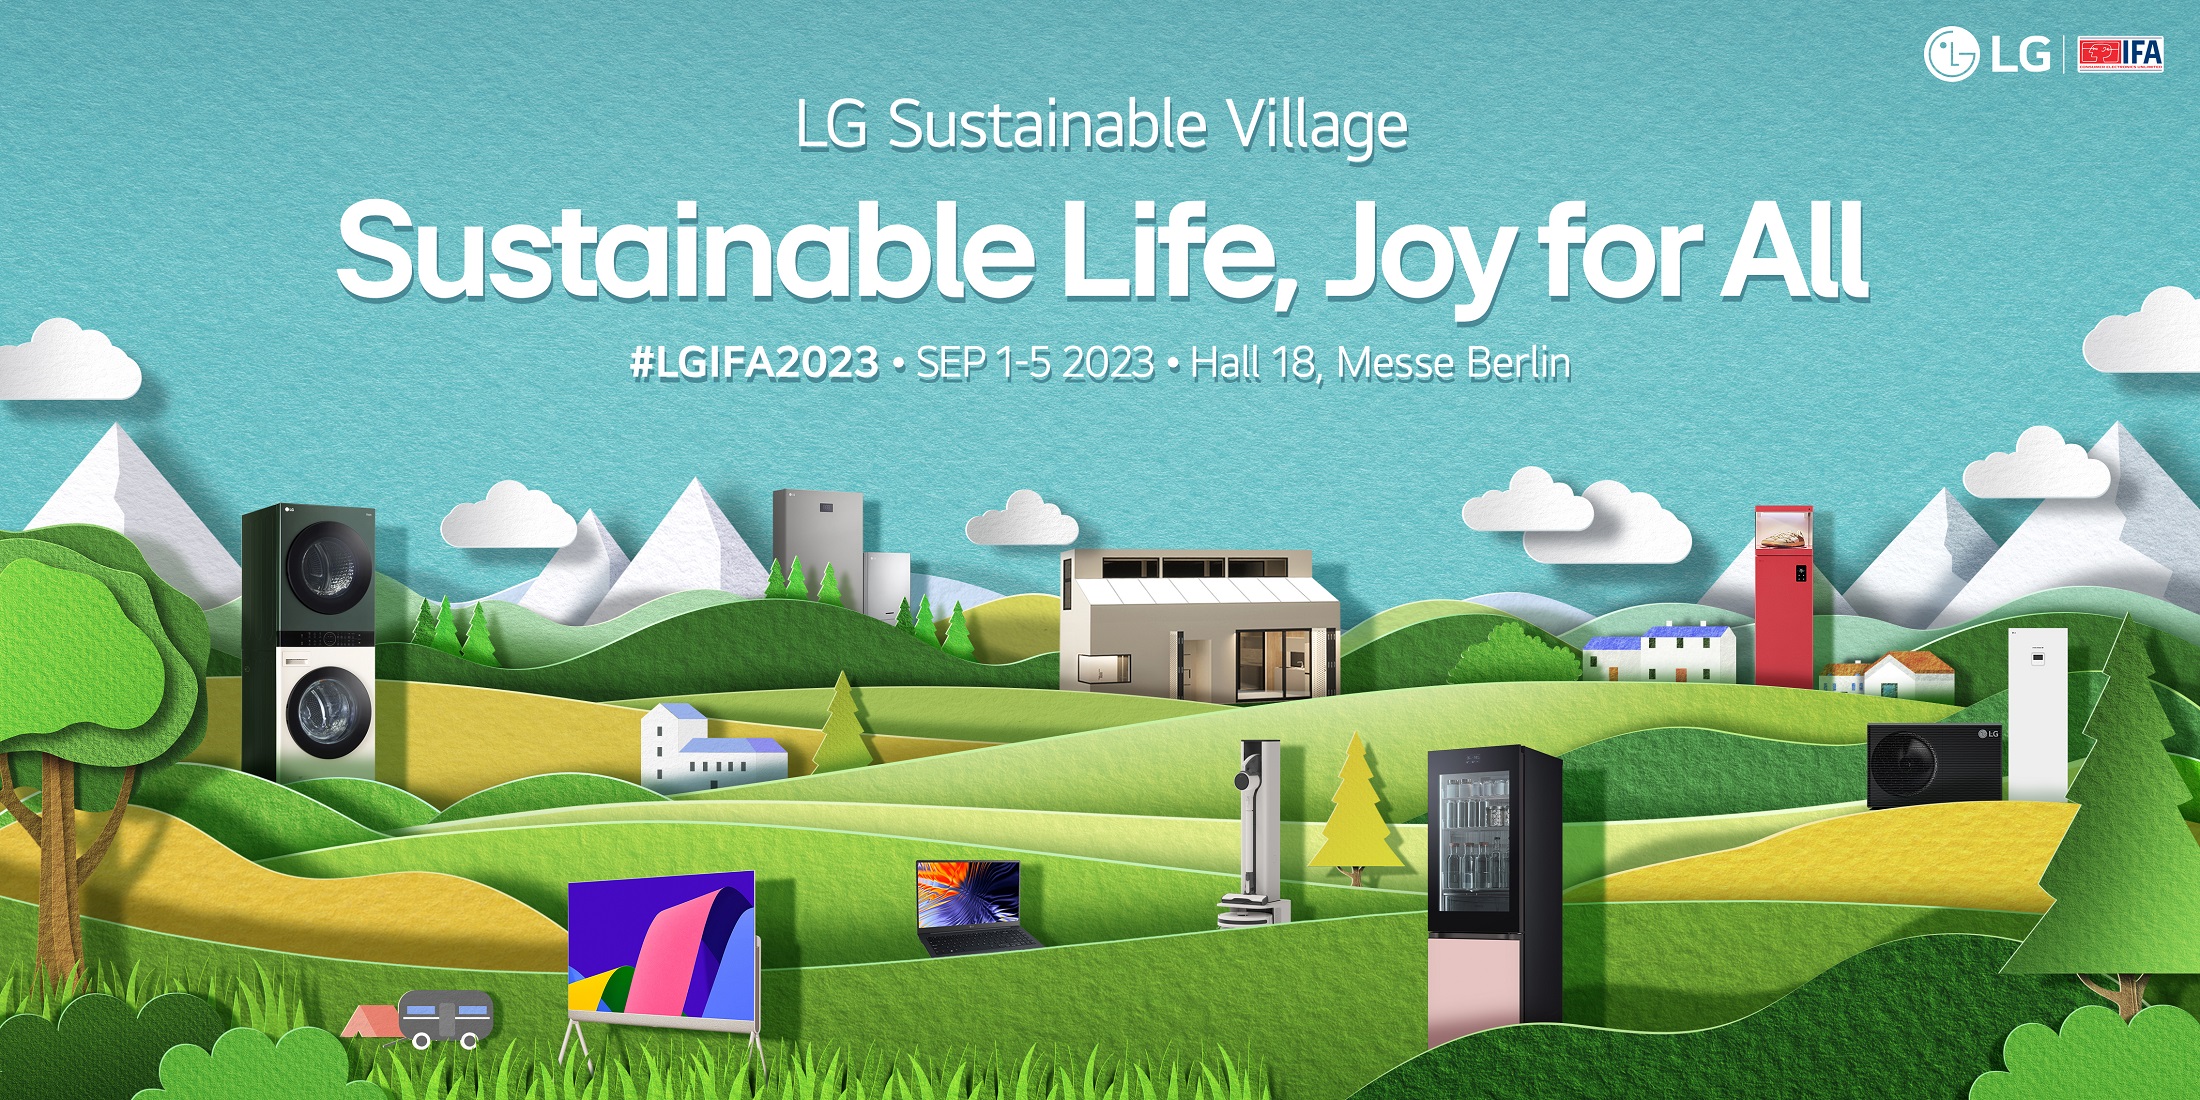 A promotional image for LG Sustainable Village available at IFA 2023